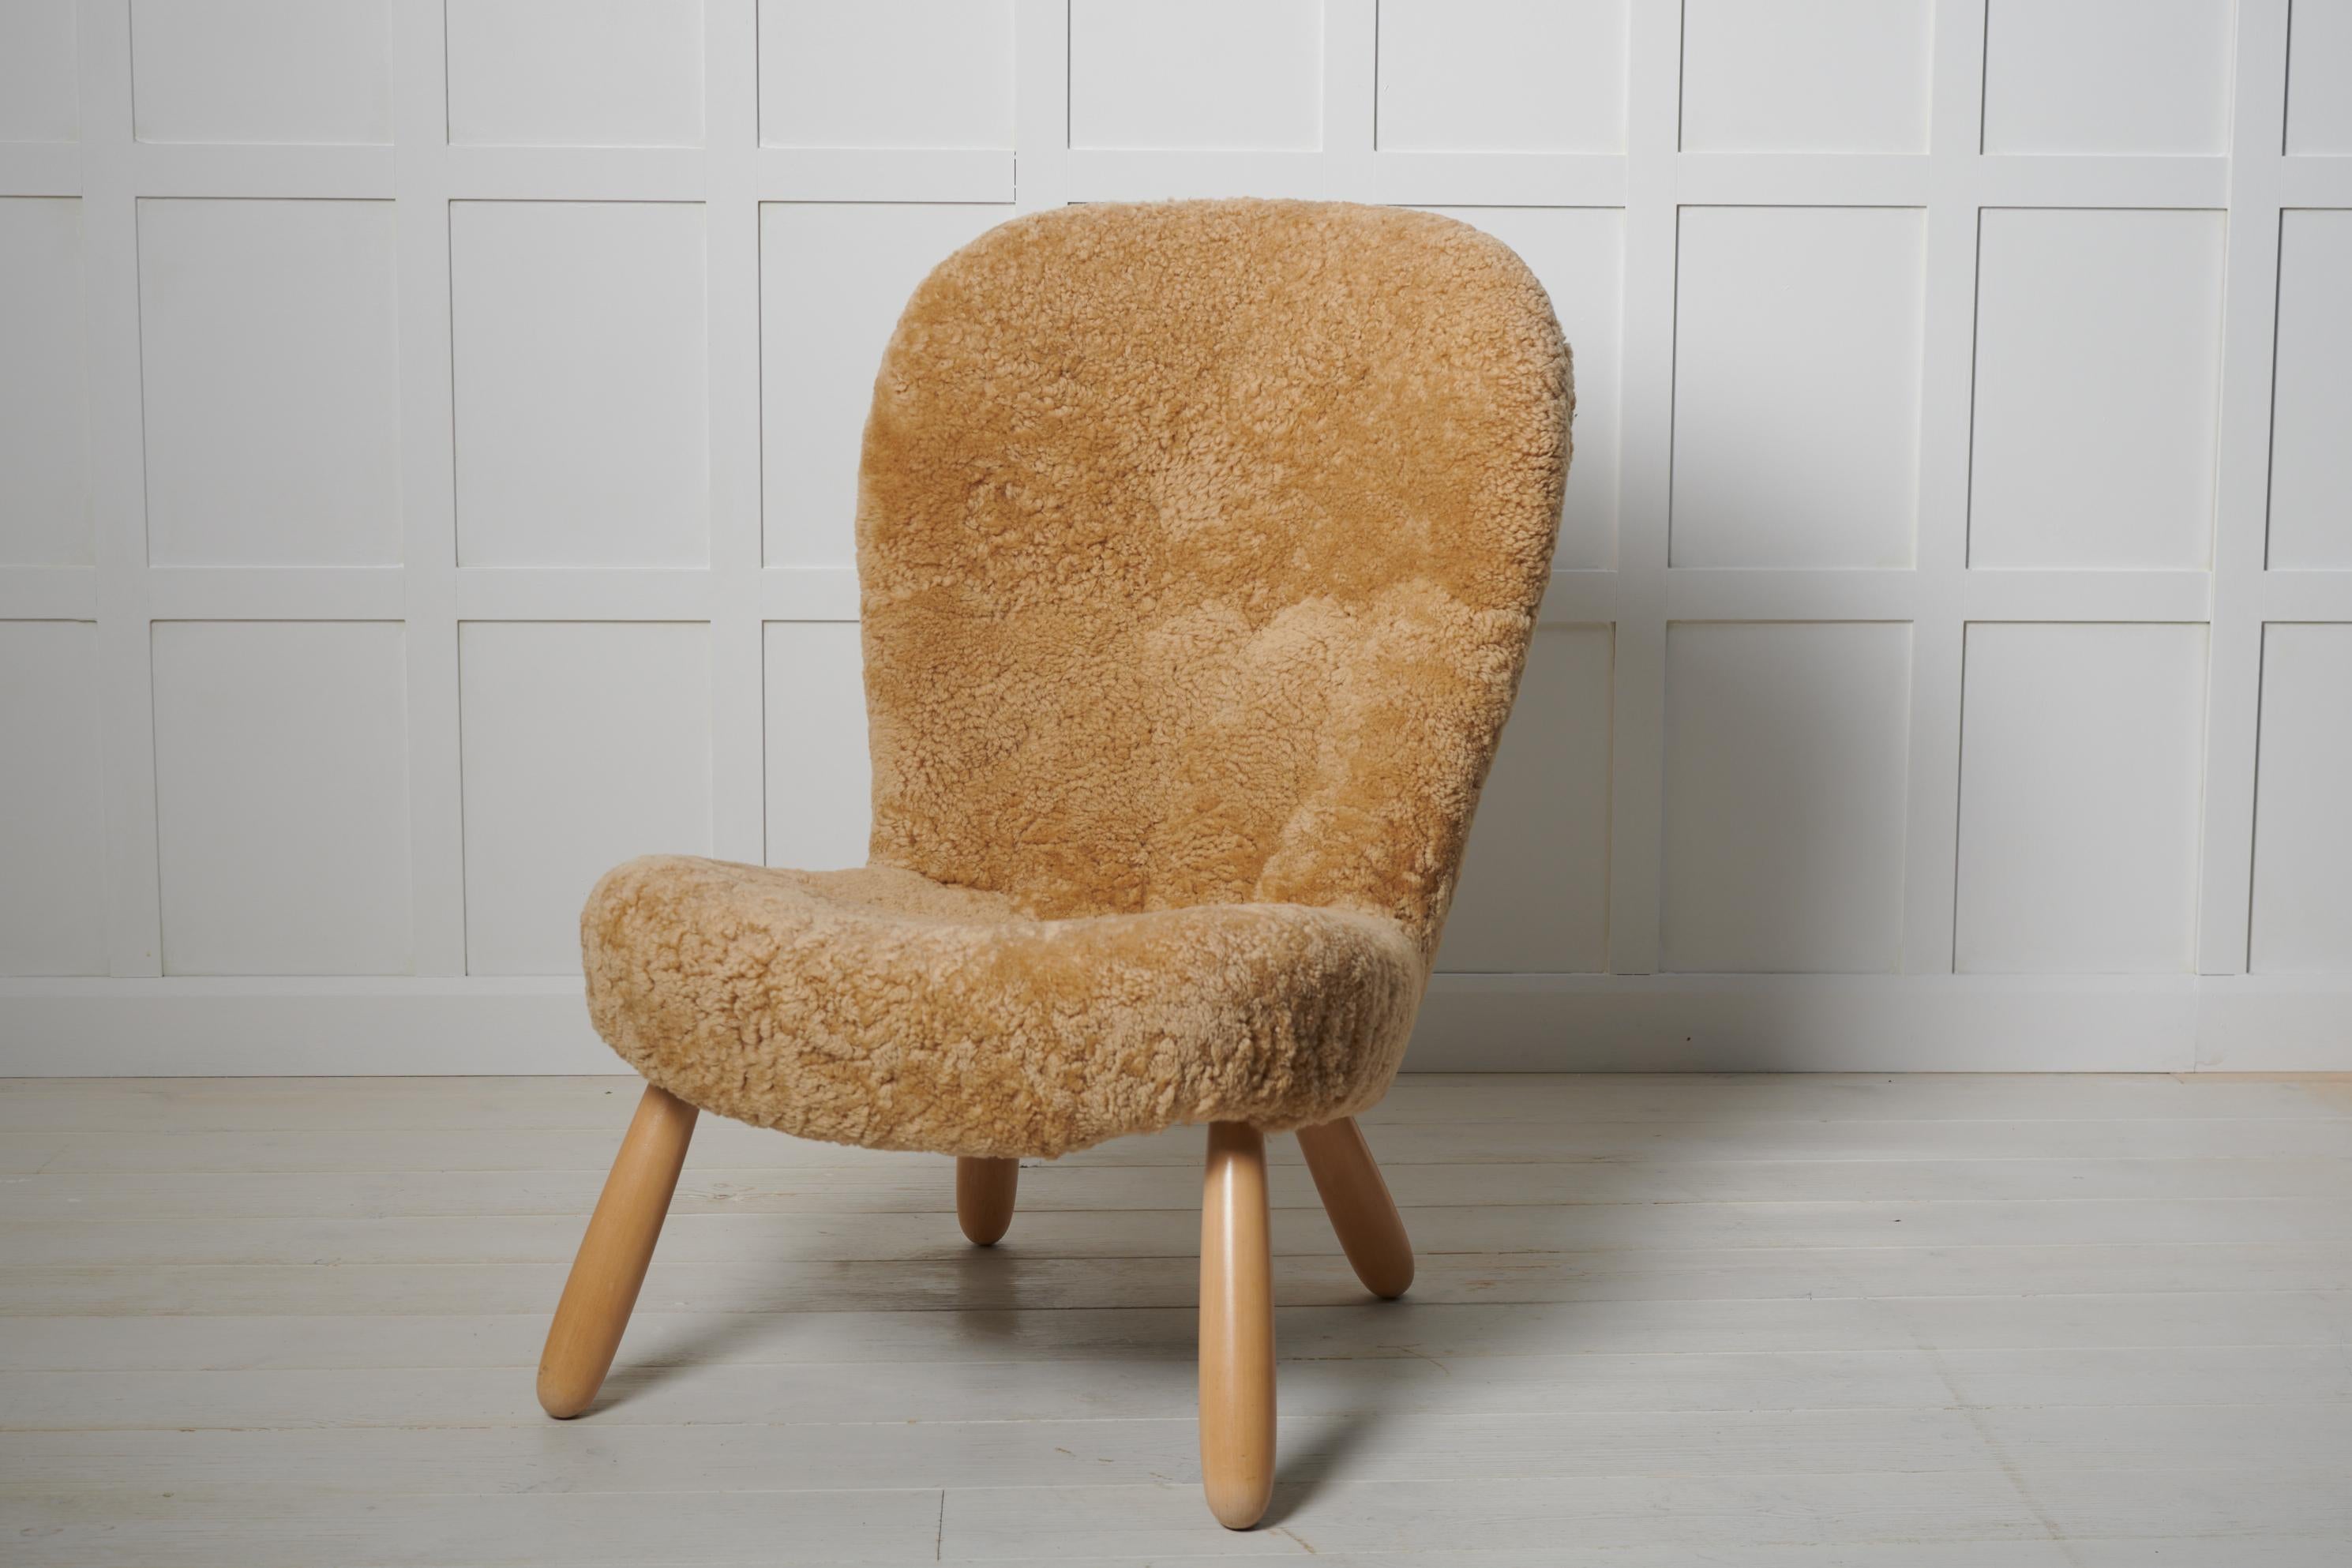 Rare Scandinavian modern Clam Chair by Arnold Madsen and produced by Madsen & Schubell. This chair is a genuine vintage chair made in Denmark during the 1940s. It has recently been completely restored and upholstered with sheepskin from Skandilock.